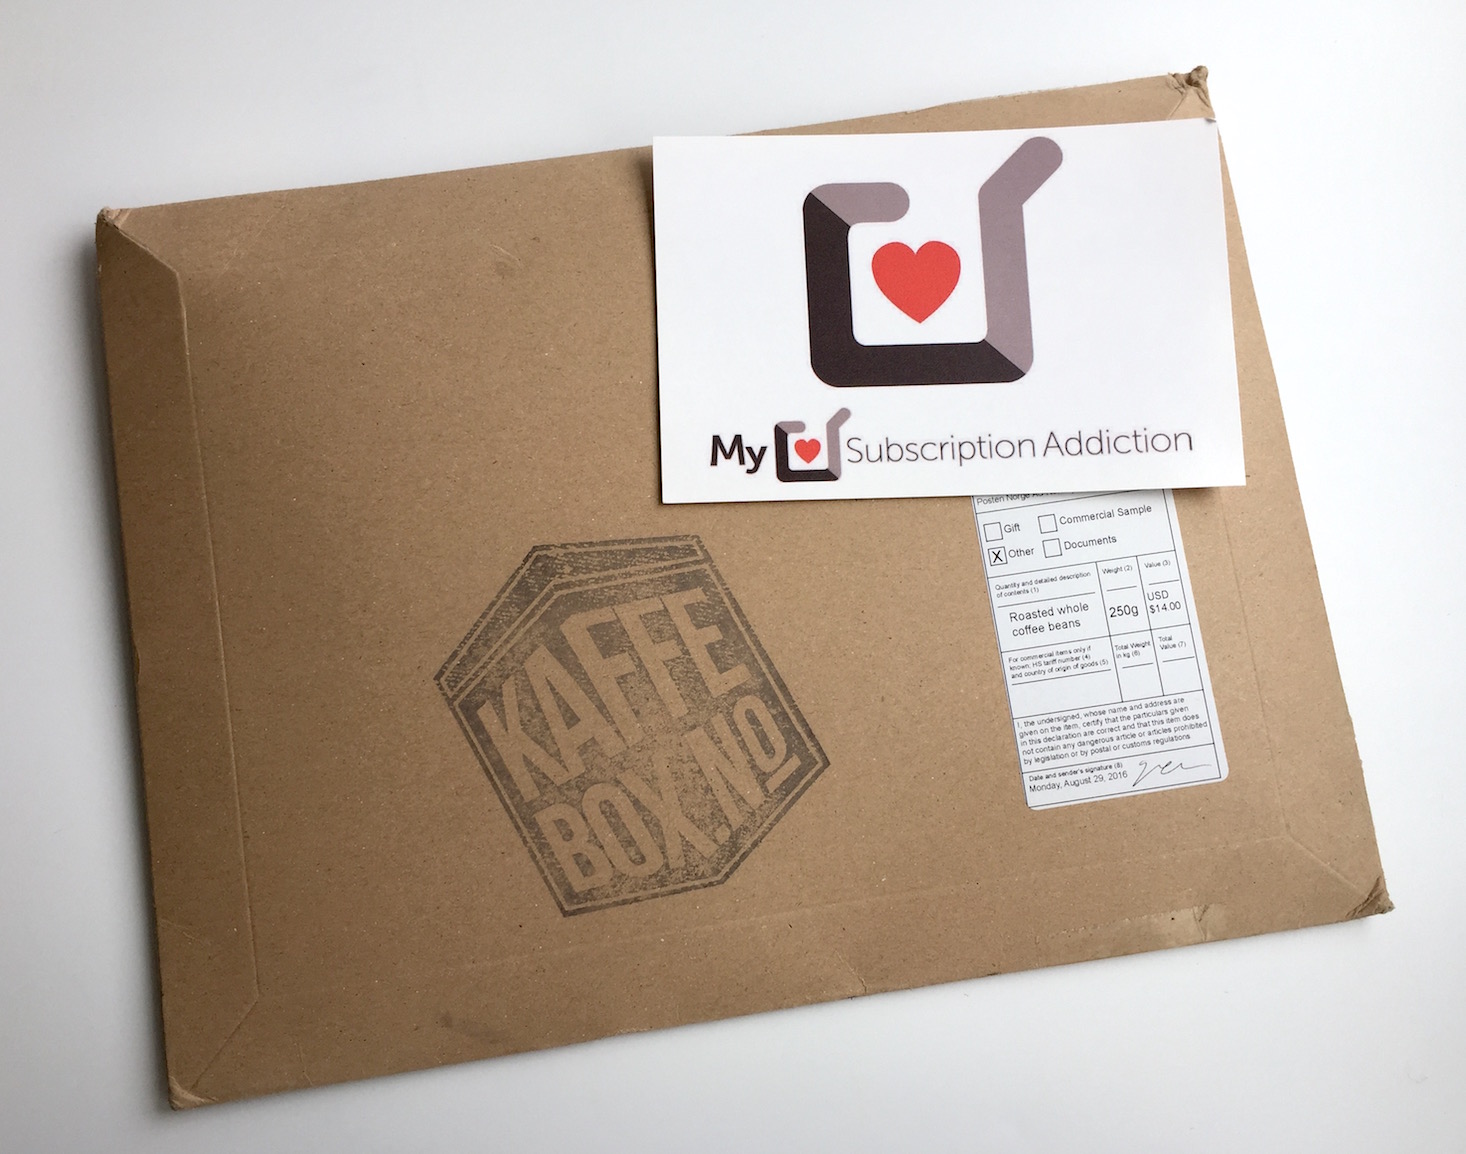 KaffeBox Coffee Subscription Review + Coupon- September 2016